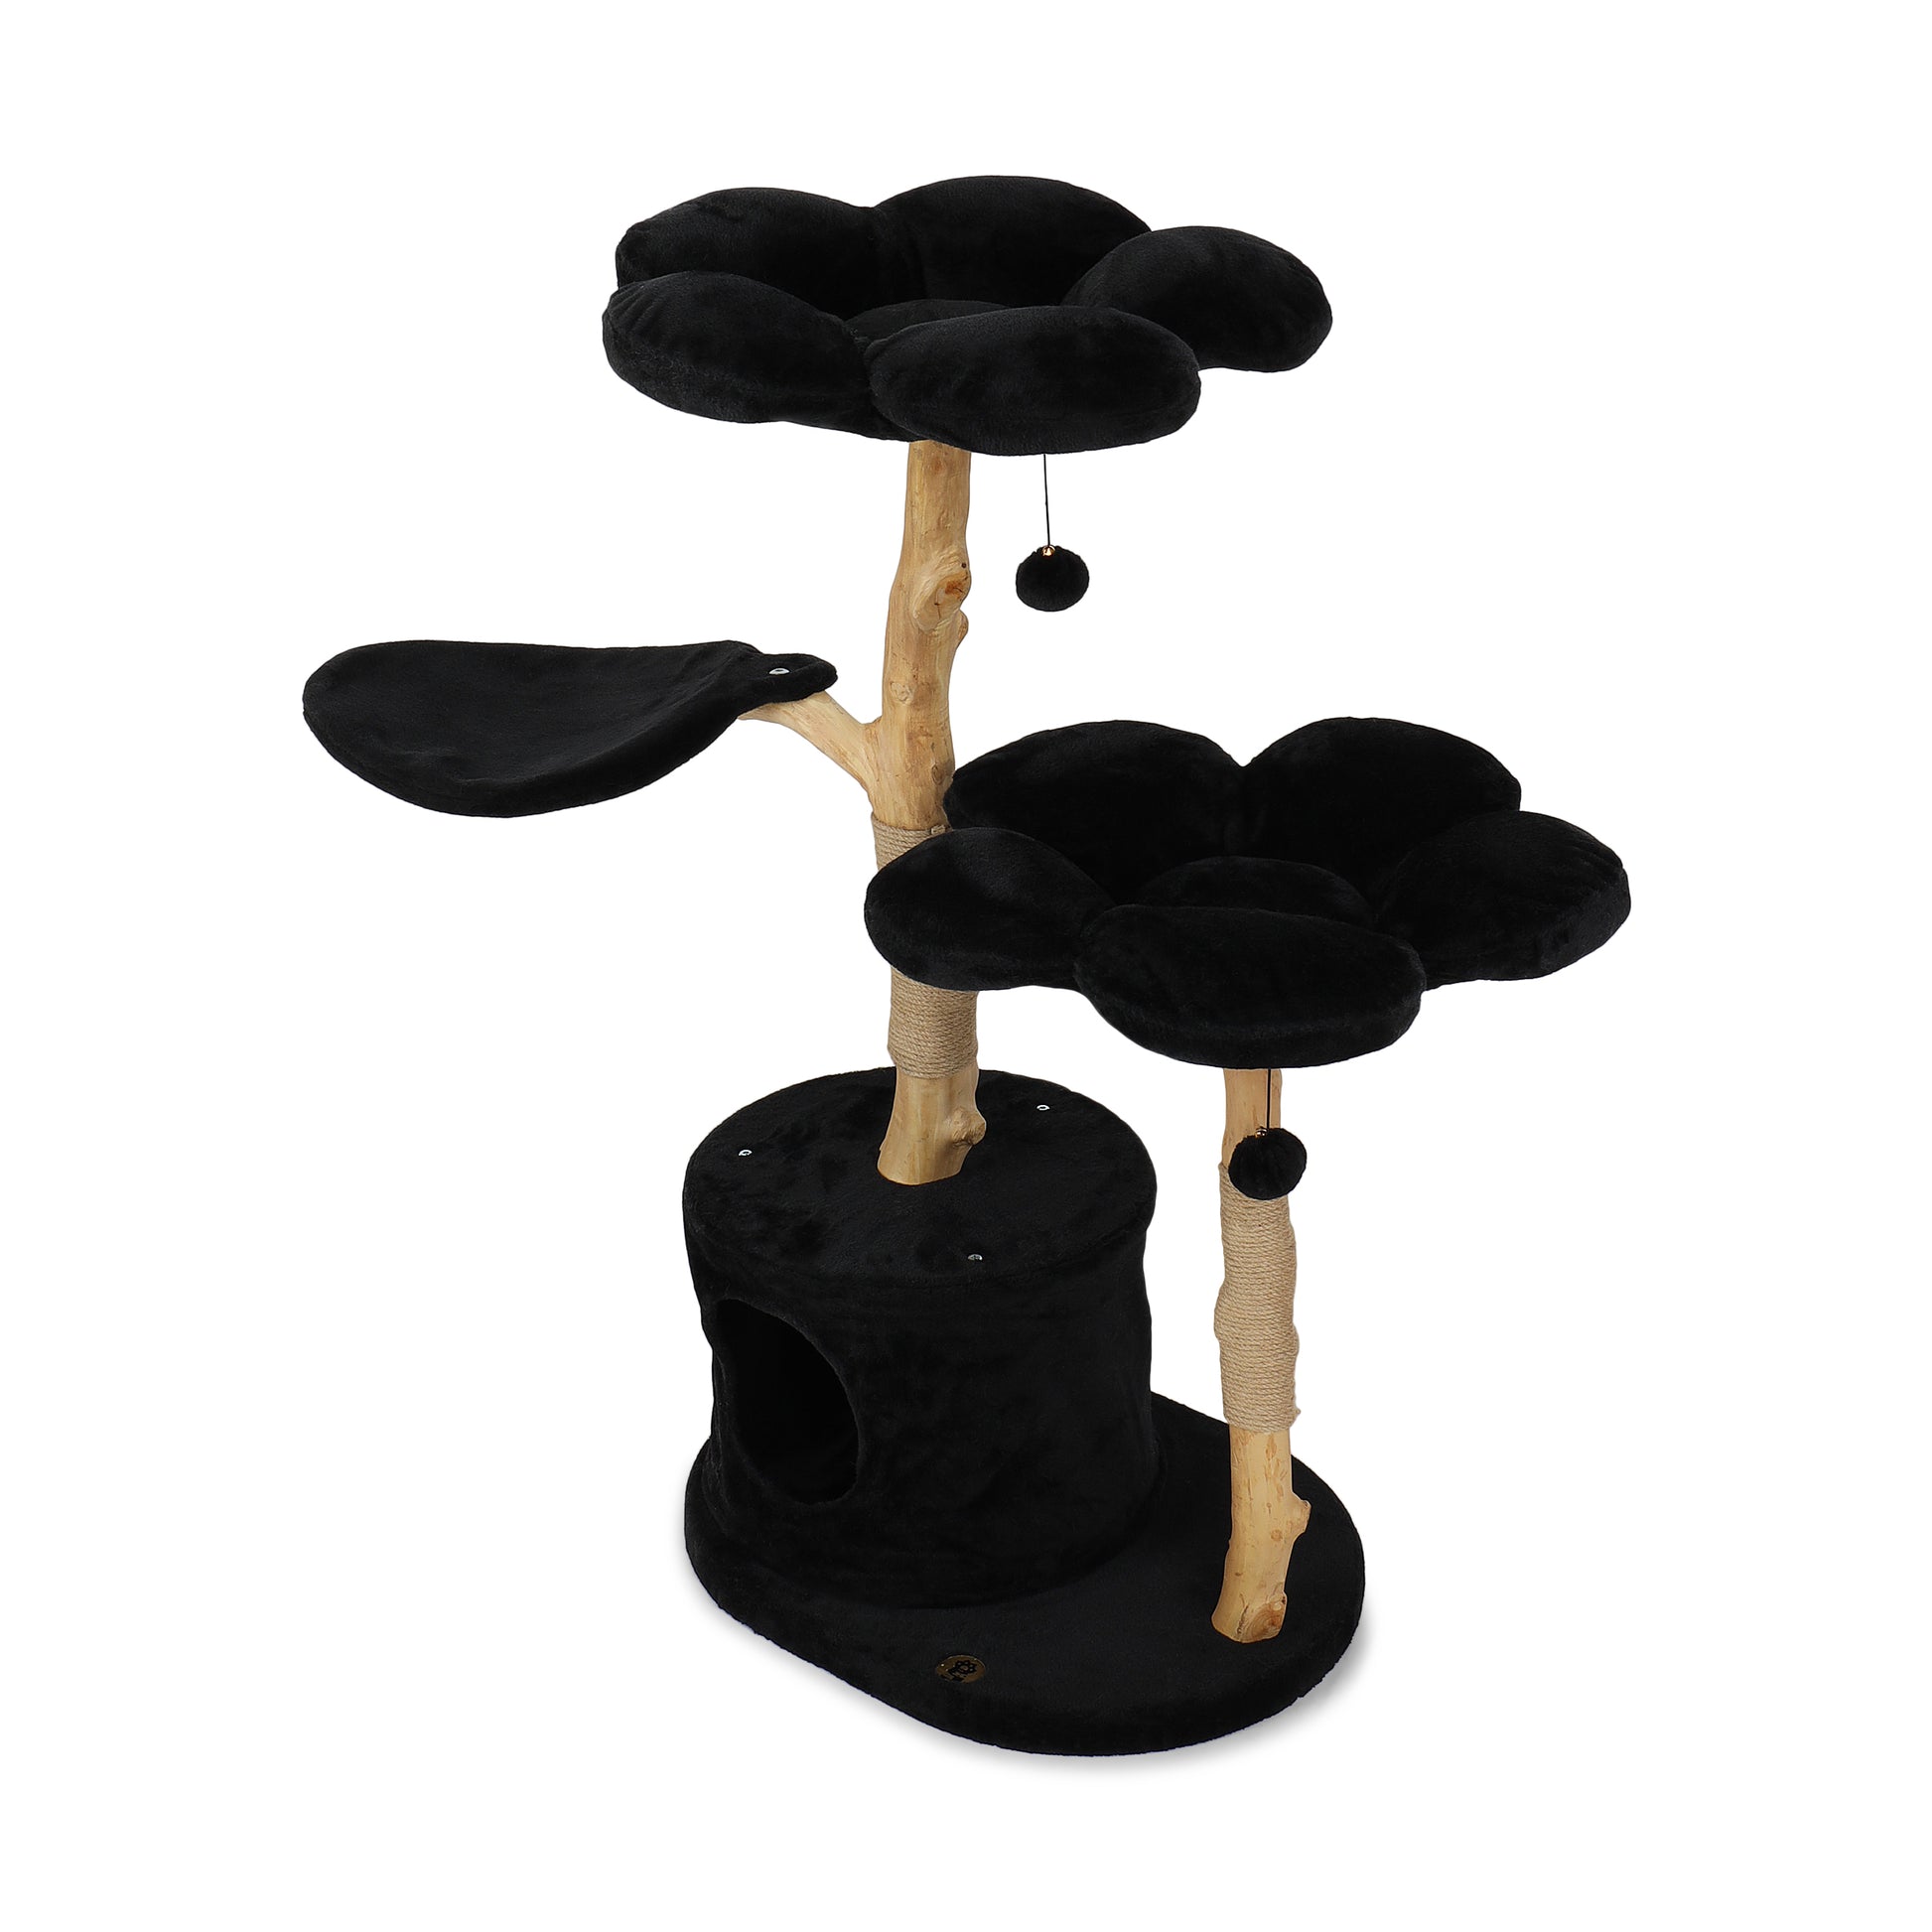 A chic cat tree with black flower accents, providing a comfy resting spot for cats